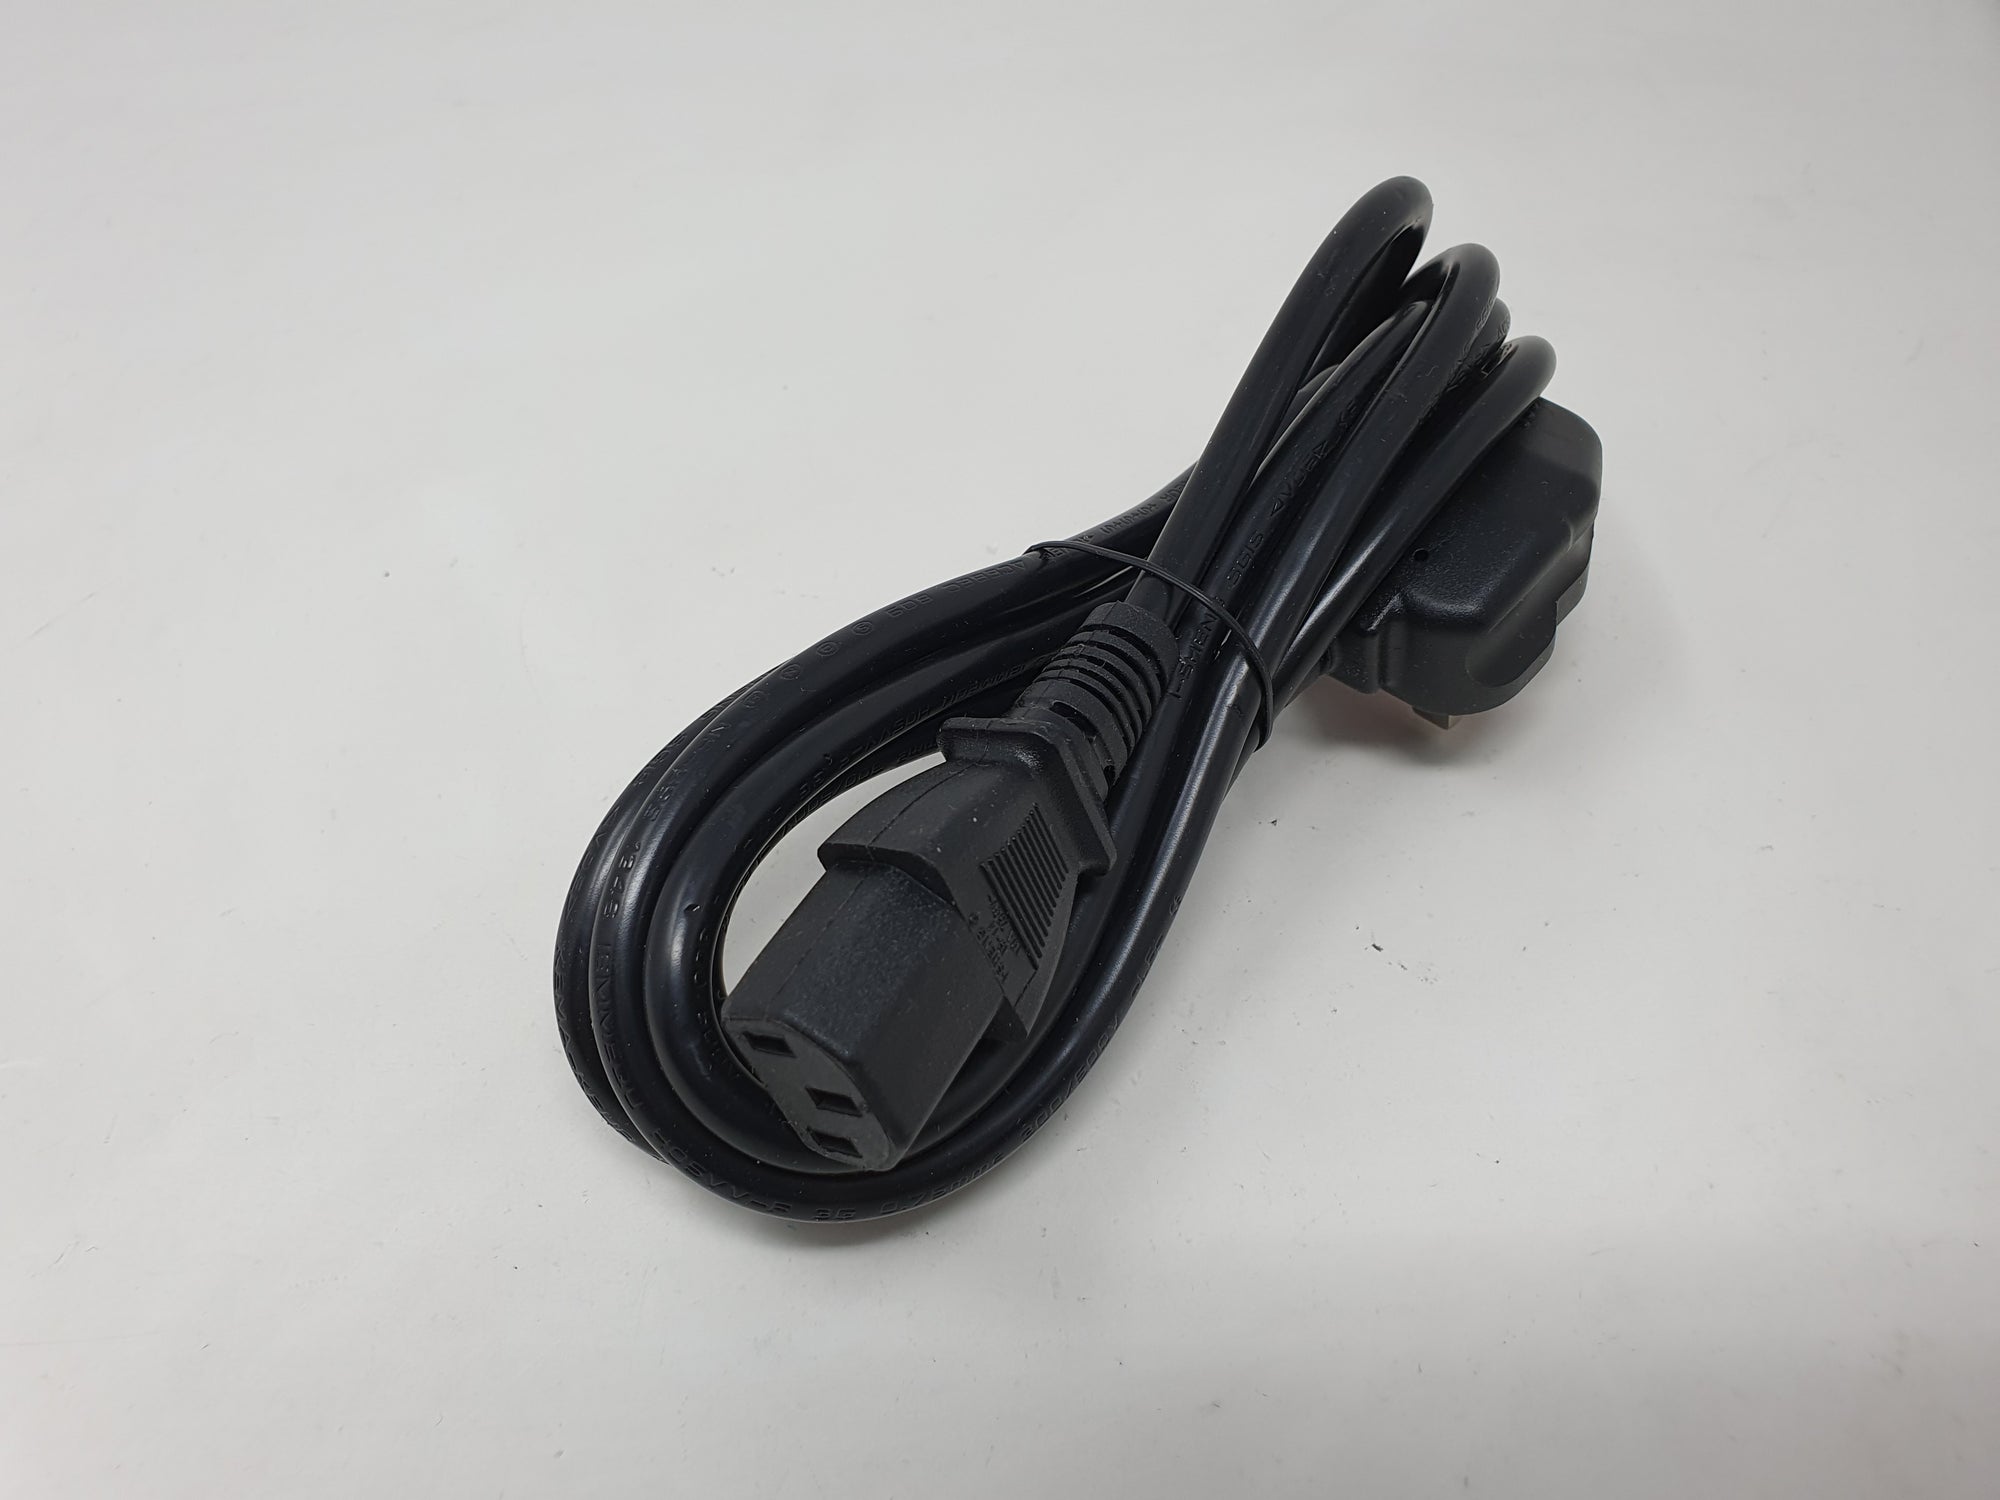 Mains Power Cable Power Lead Kettle lead IEC 1.8m 3 PIN UK PLUG for PC TV Monitor